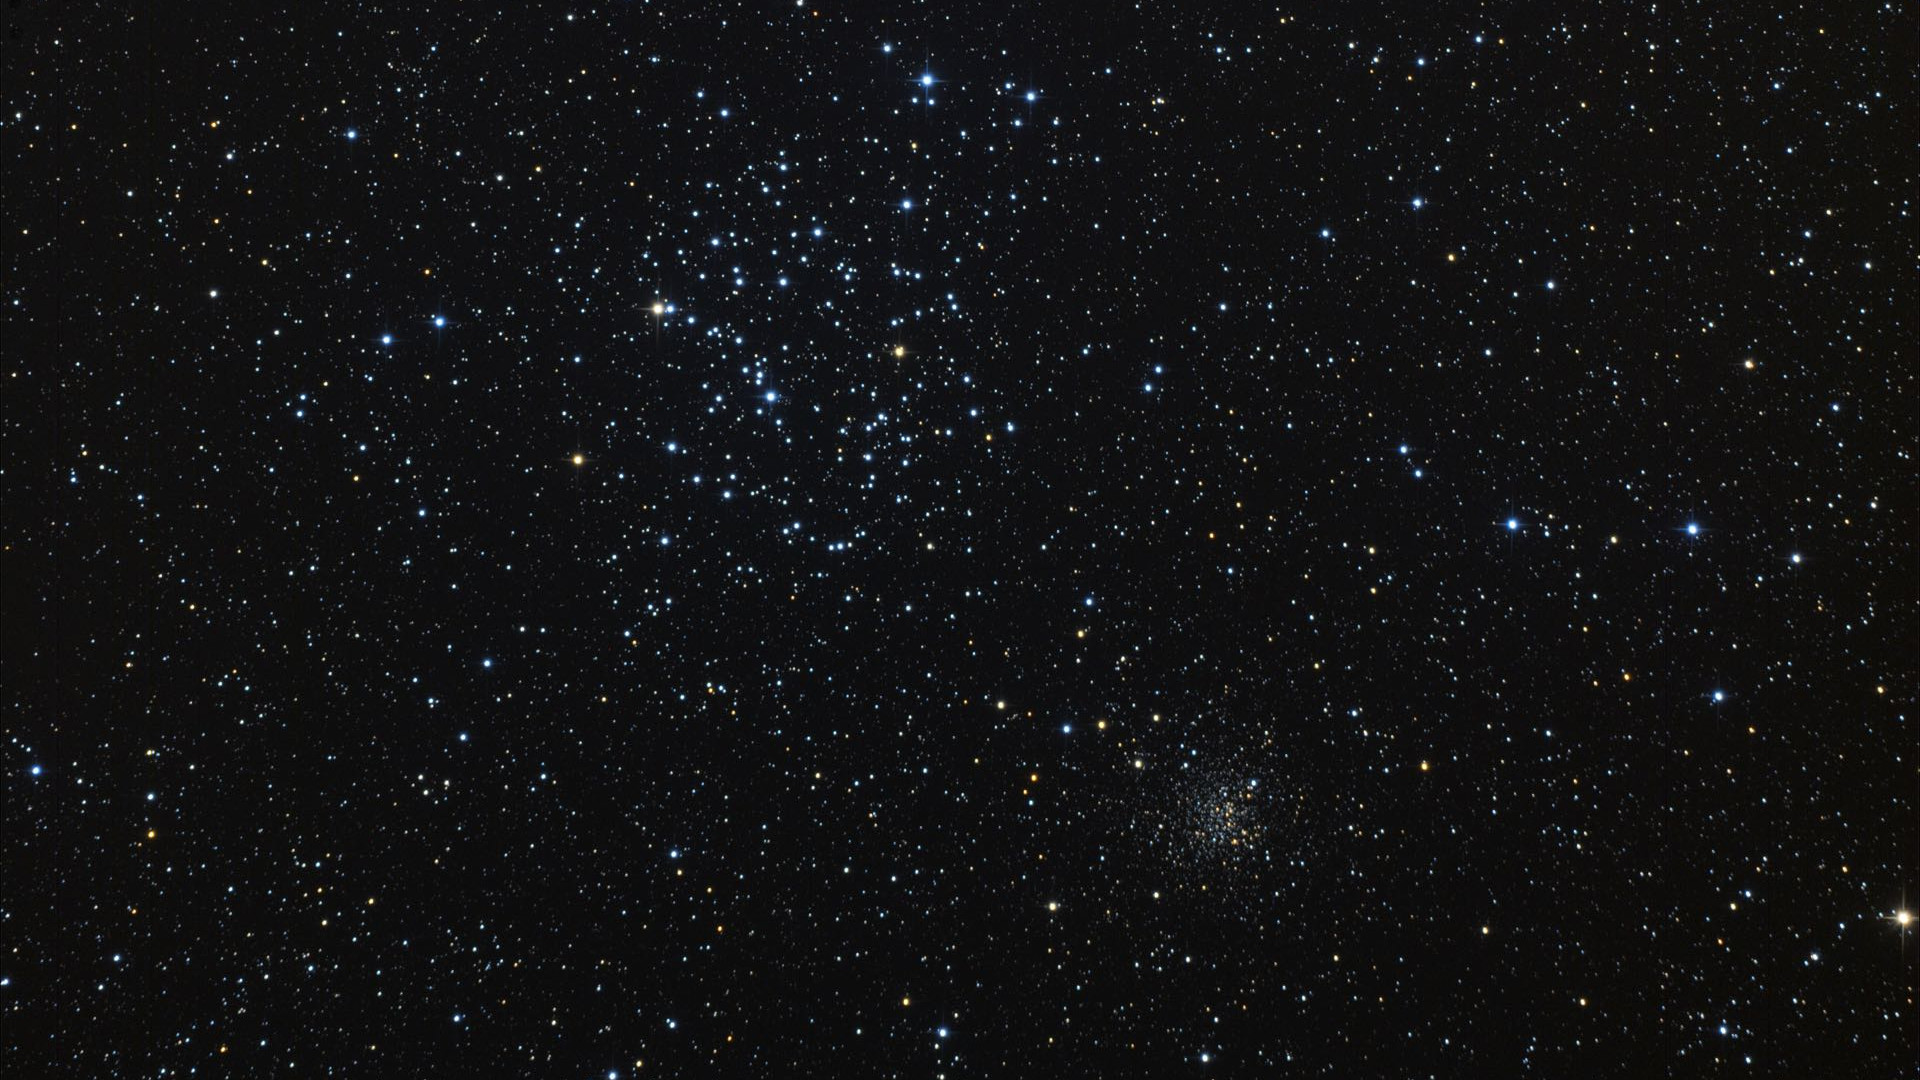 M35 is the highlight of our binoculars tour of Gemini. The open cluster NGC 2158, however, can only be observed with a telescope. Marcus Degenkolbe